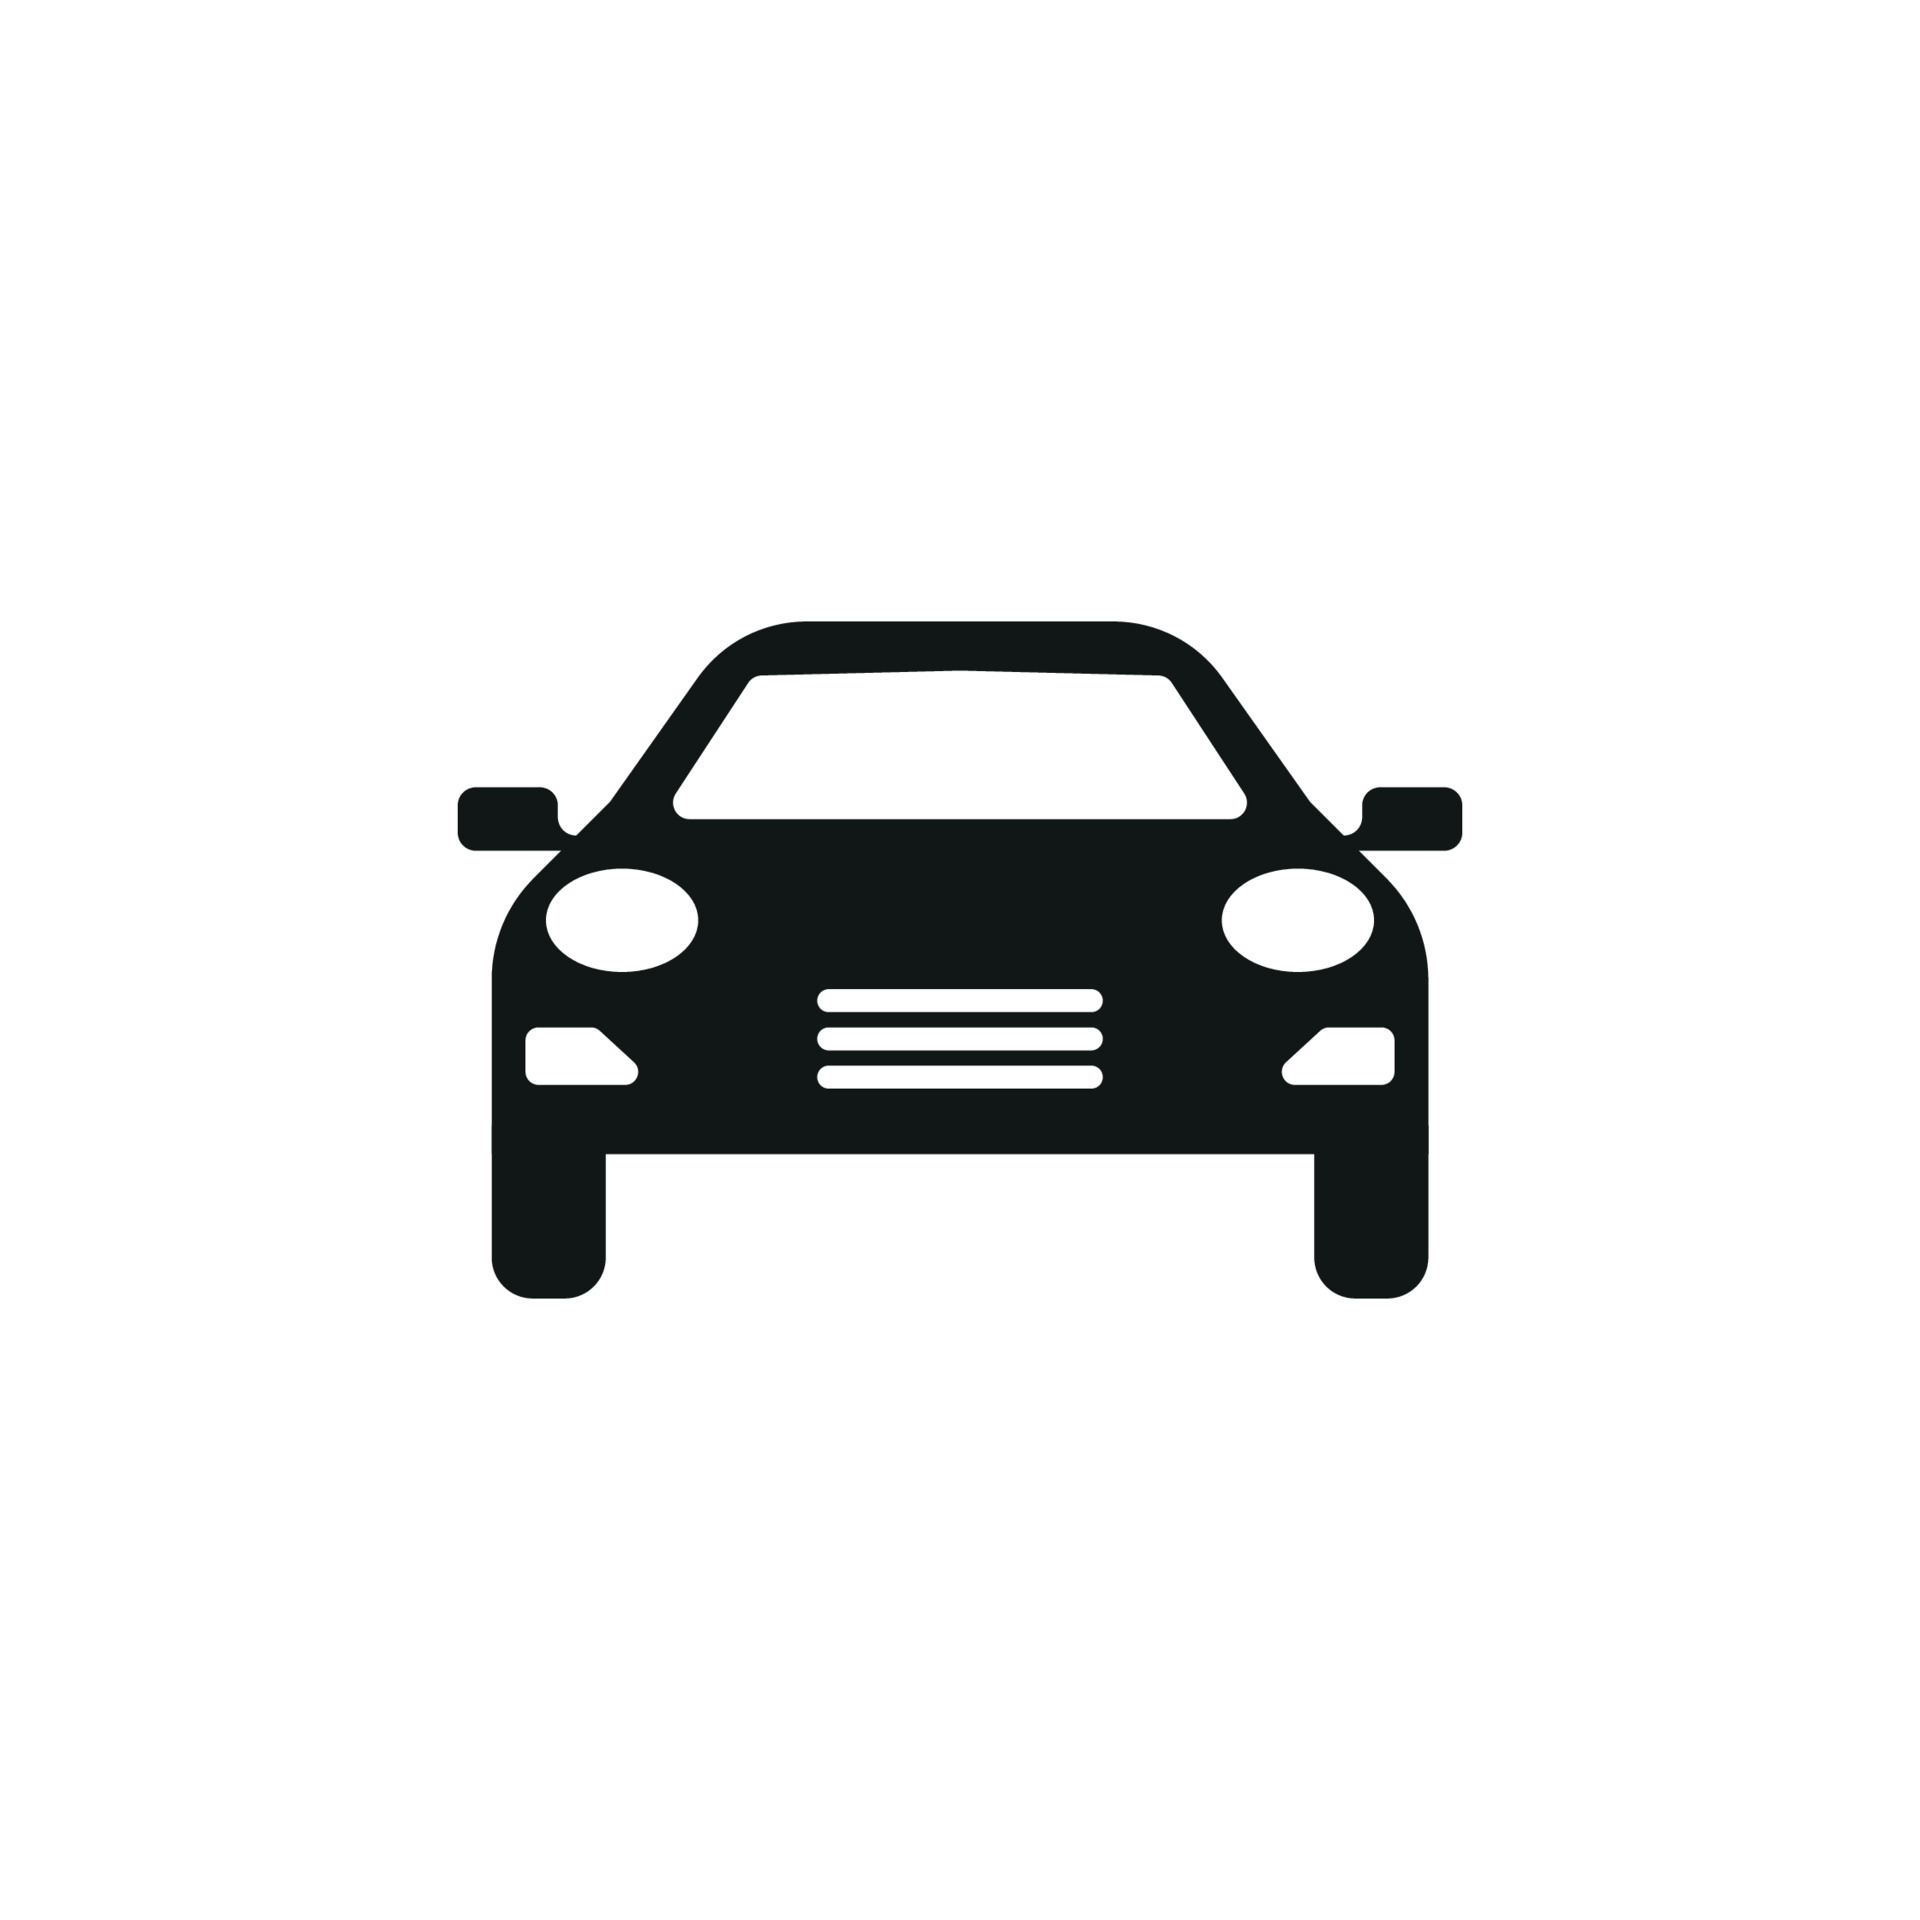 Car vector icon. Isolated simple view front logo illustration